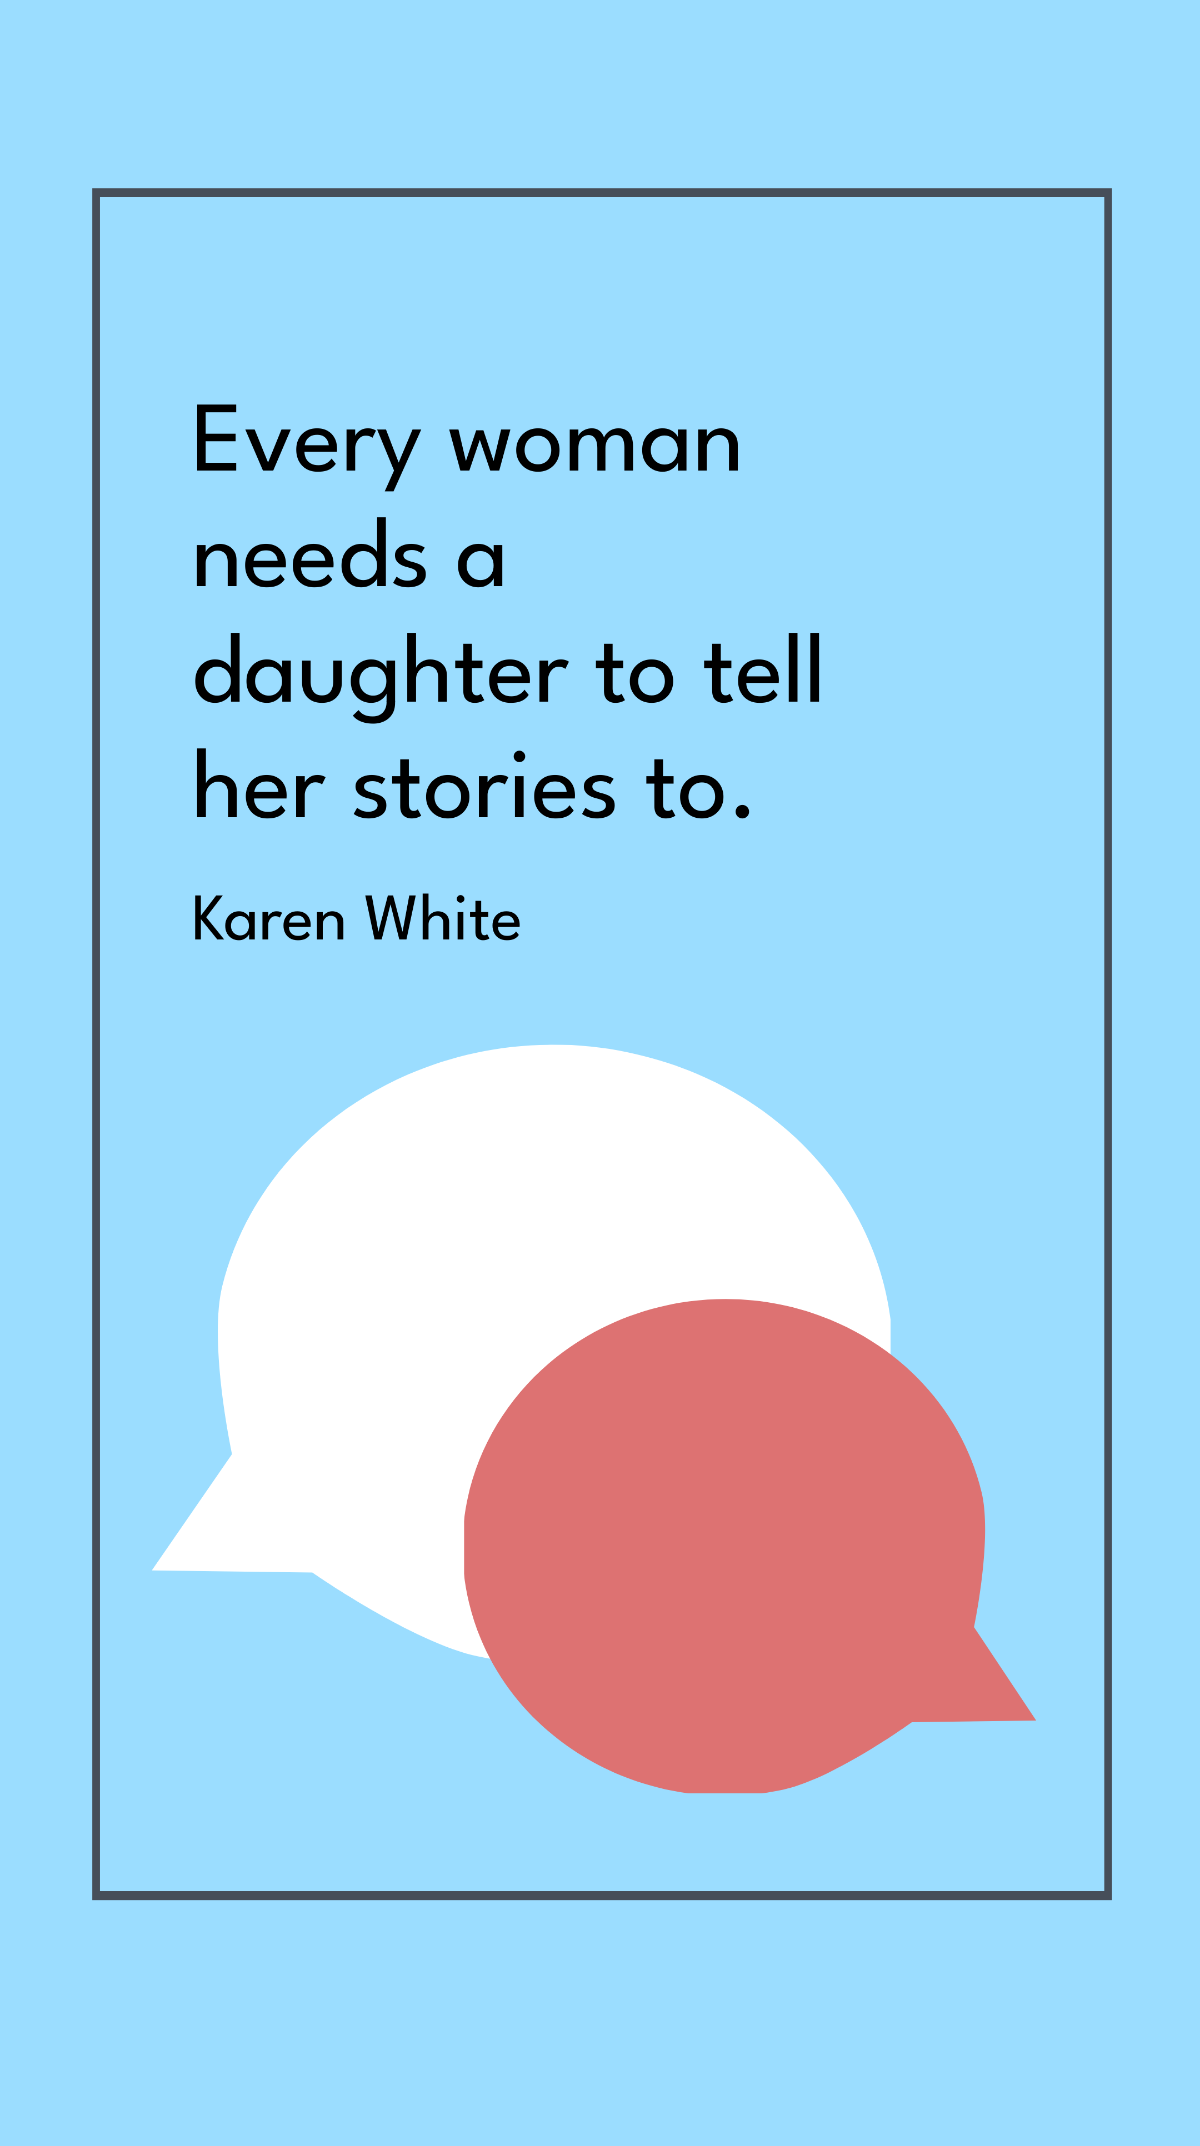 Karen White - Every woman needs a daughter to tell her stories to. Template